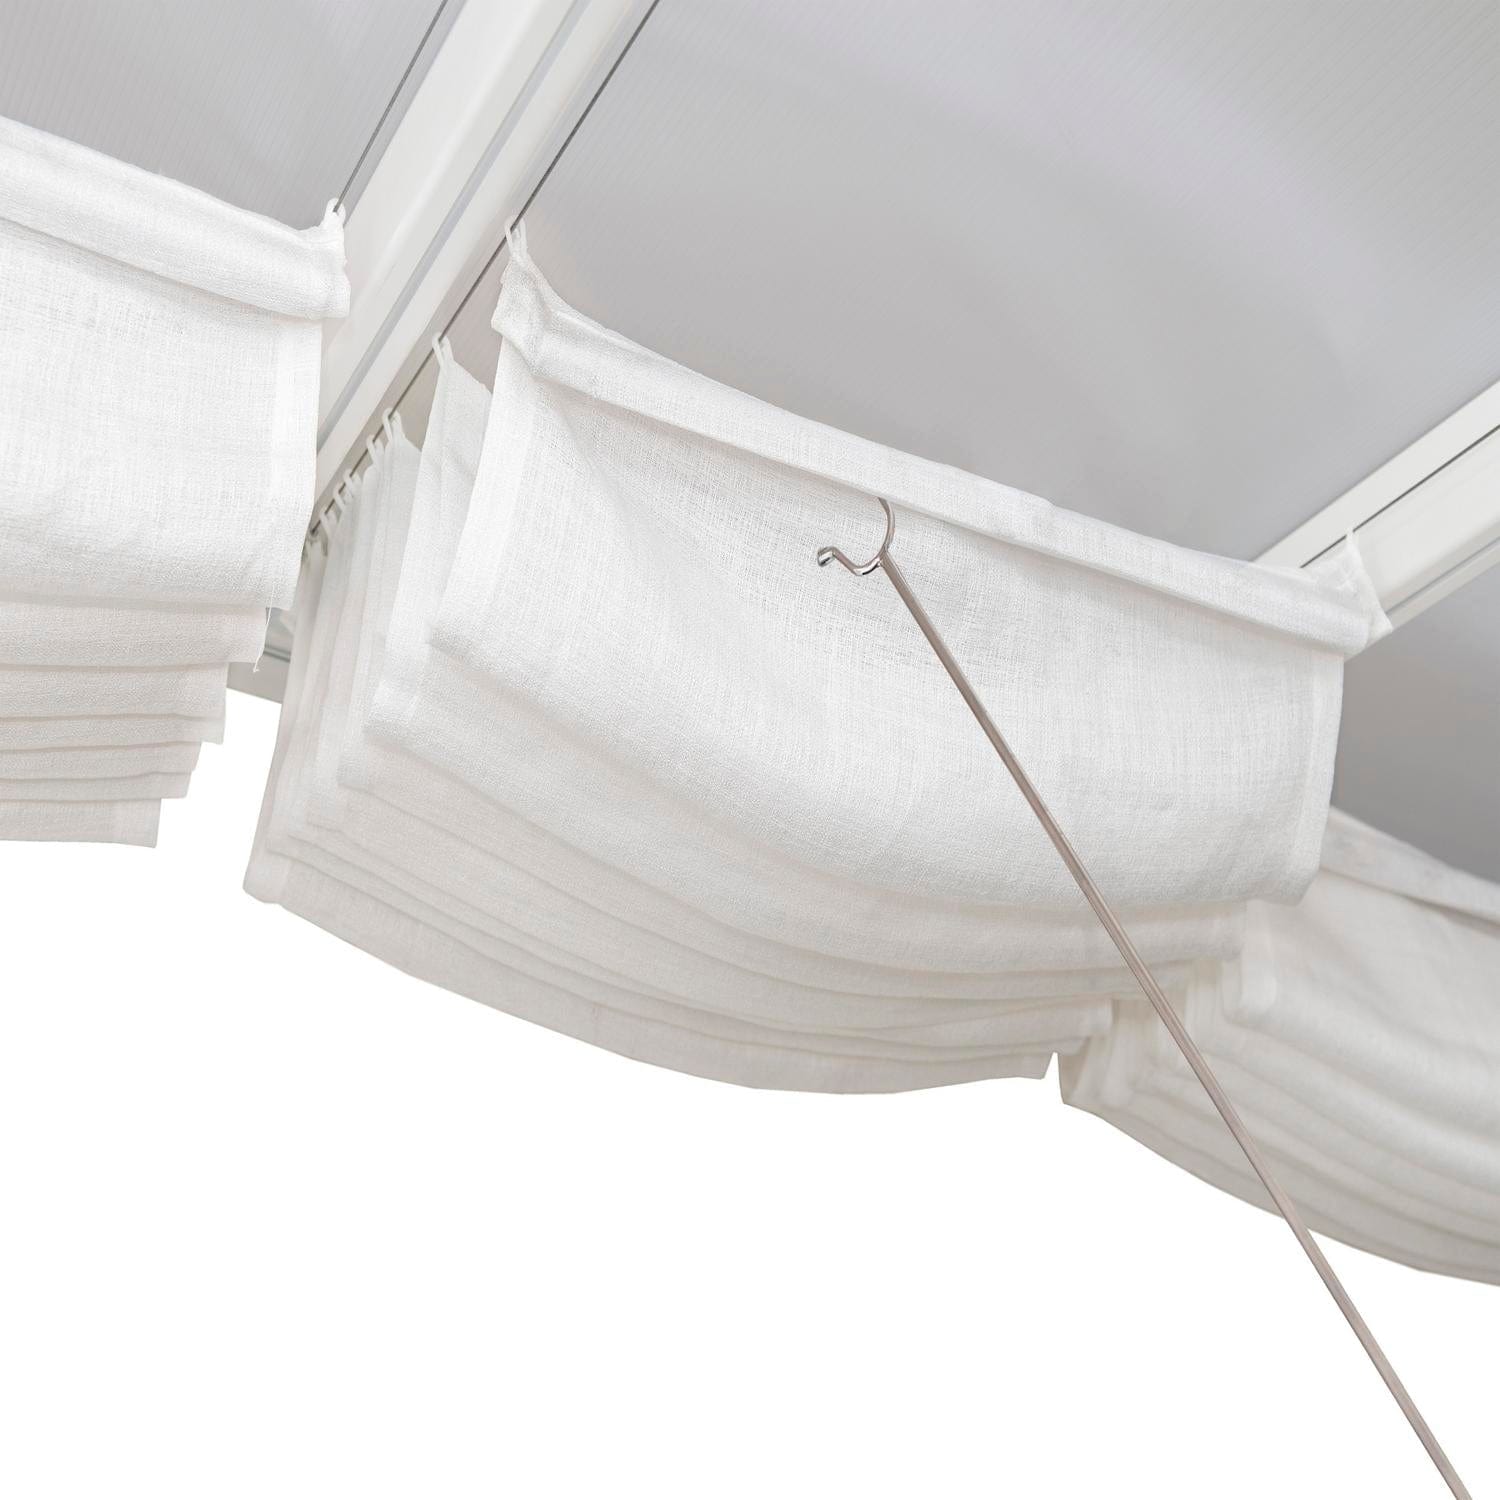 Palram - Canopia Patio Cover Accessories Palram - Canopia | Patio Cover Blinds 10x14 ft - White HG1072